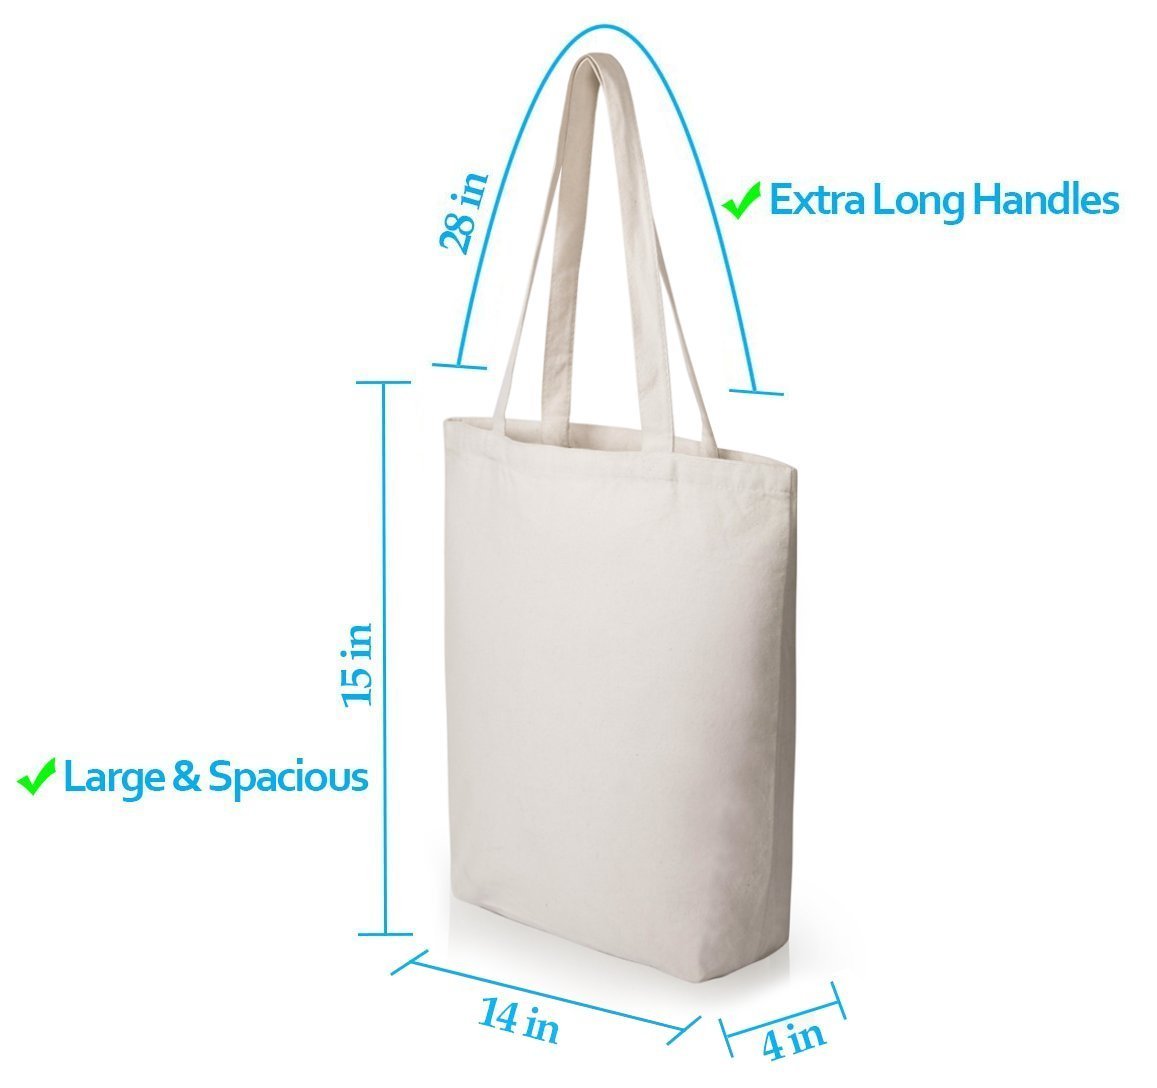 Gusset Jumbo Canvas Totes